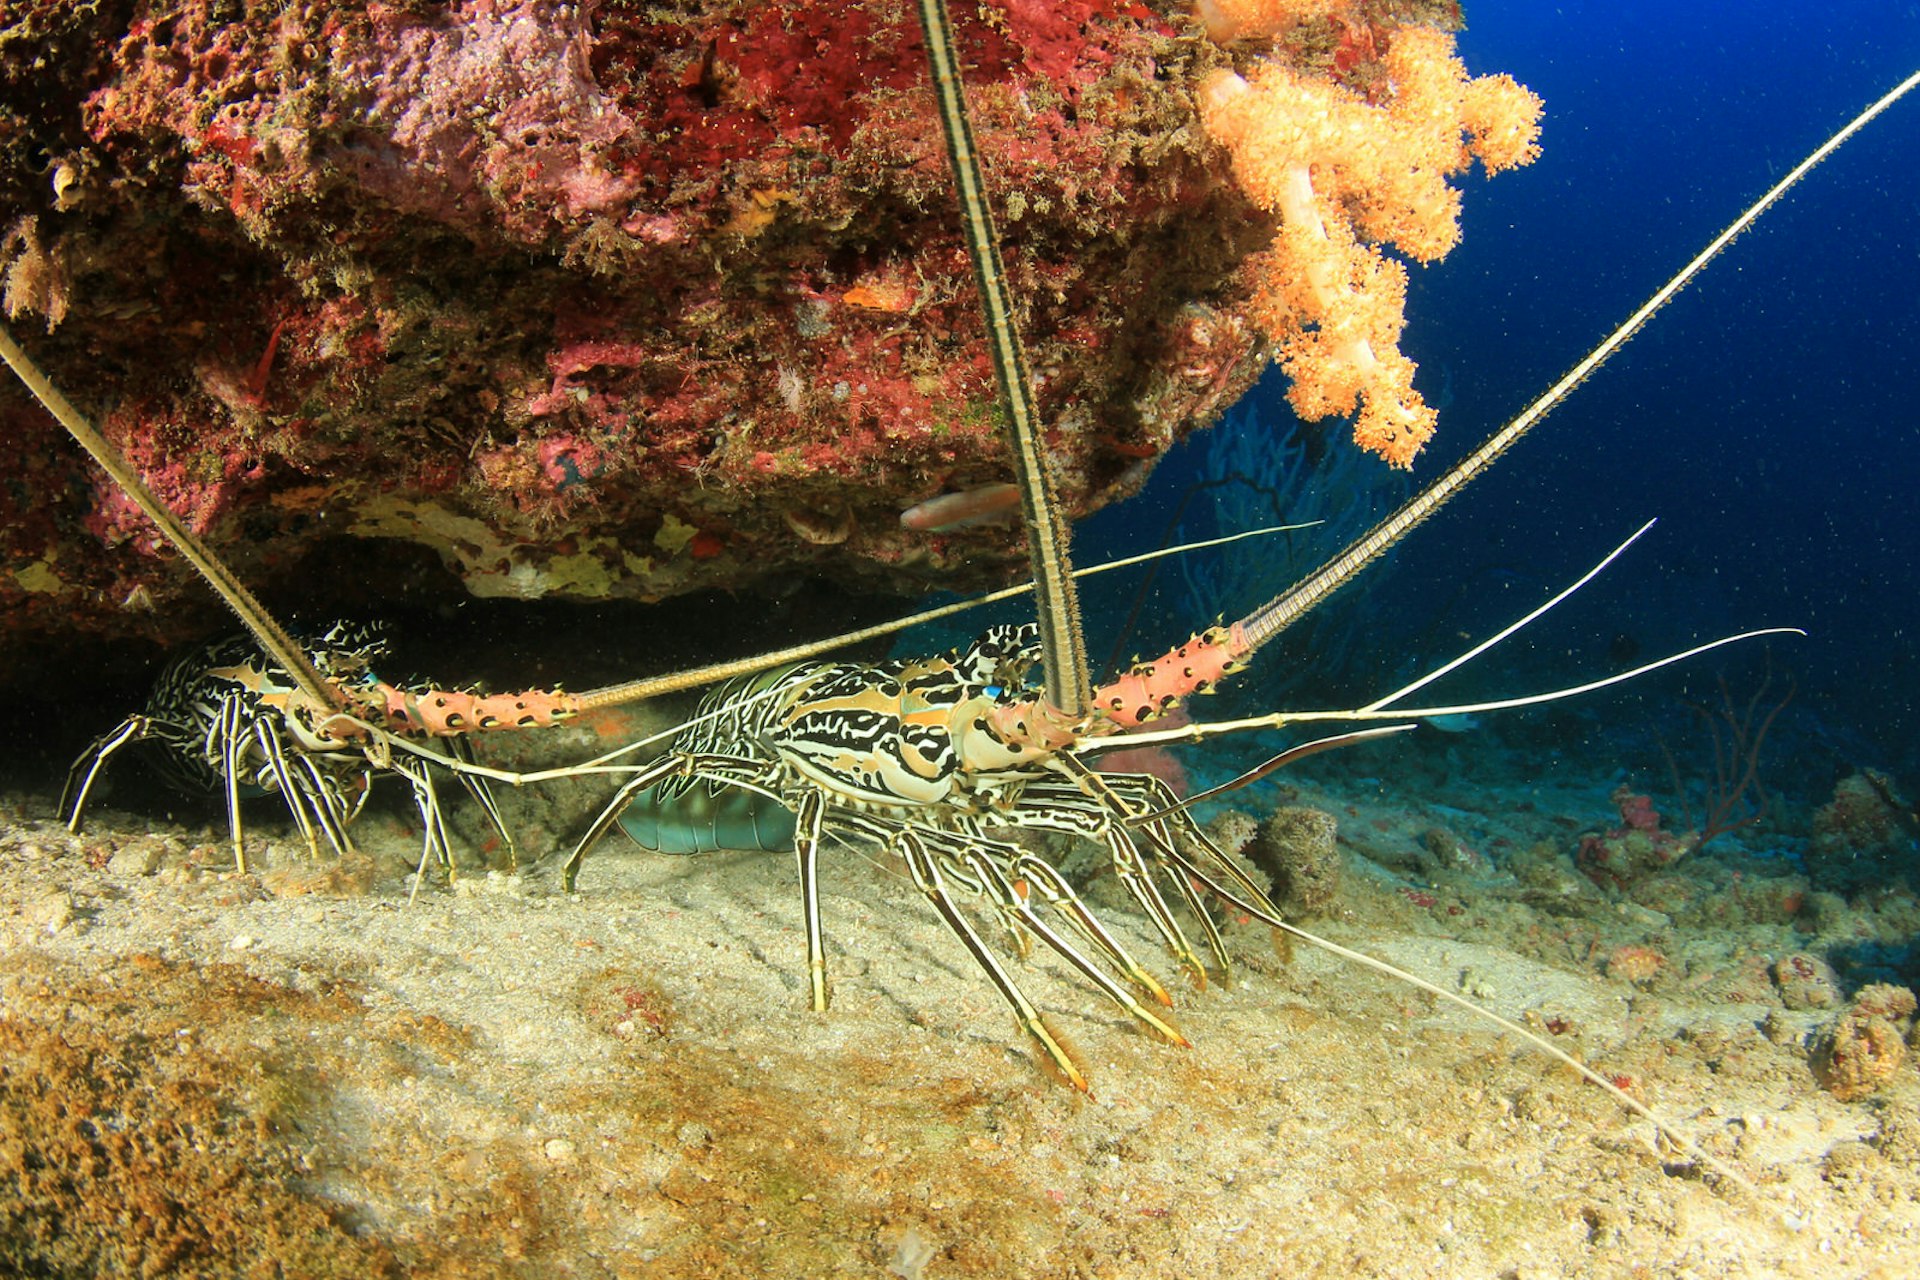 Two spiny lobsters under a rock